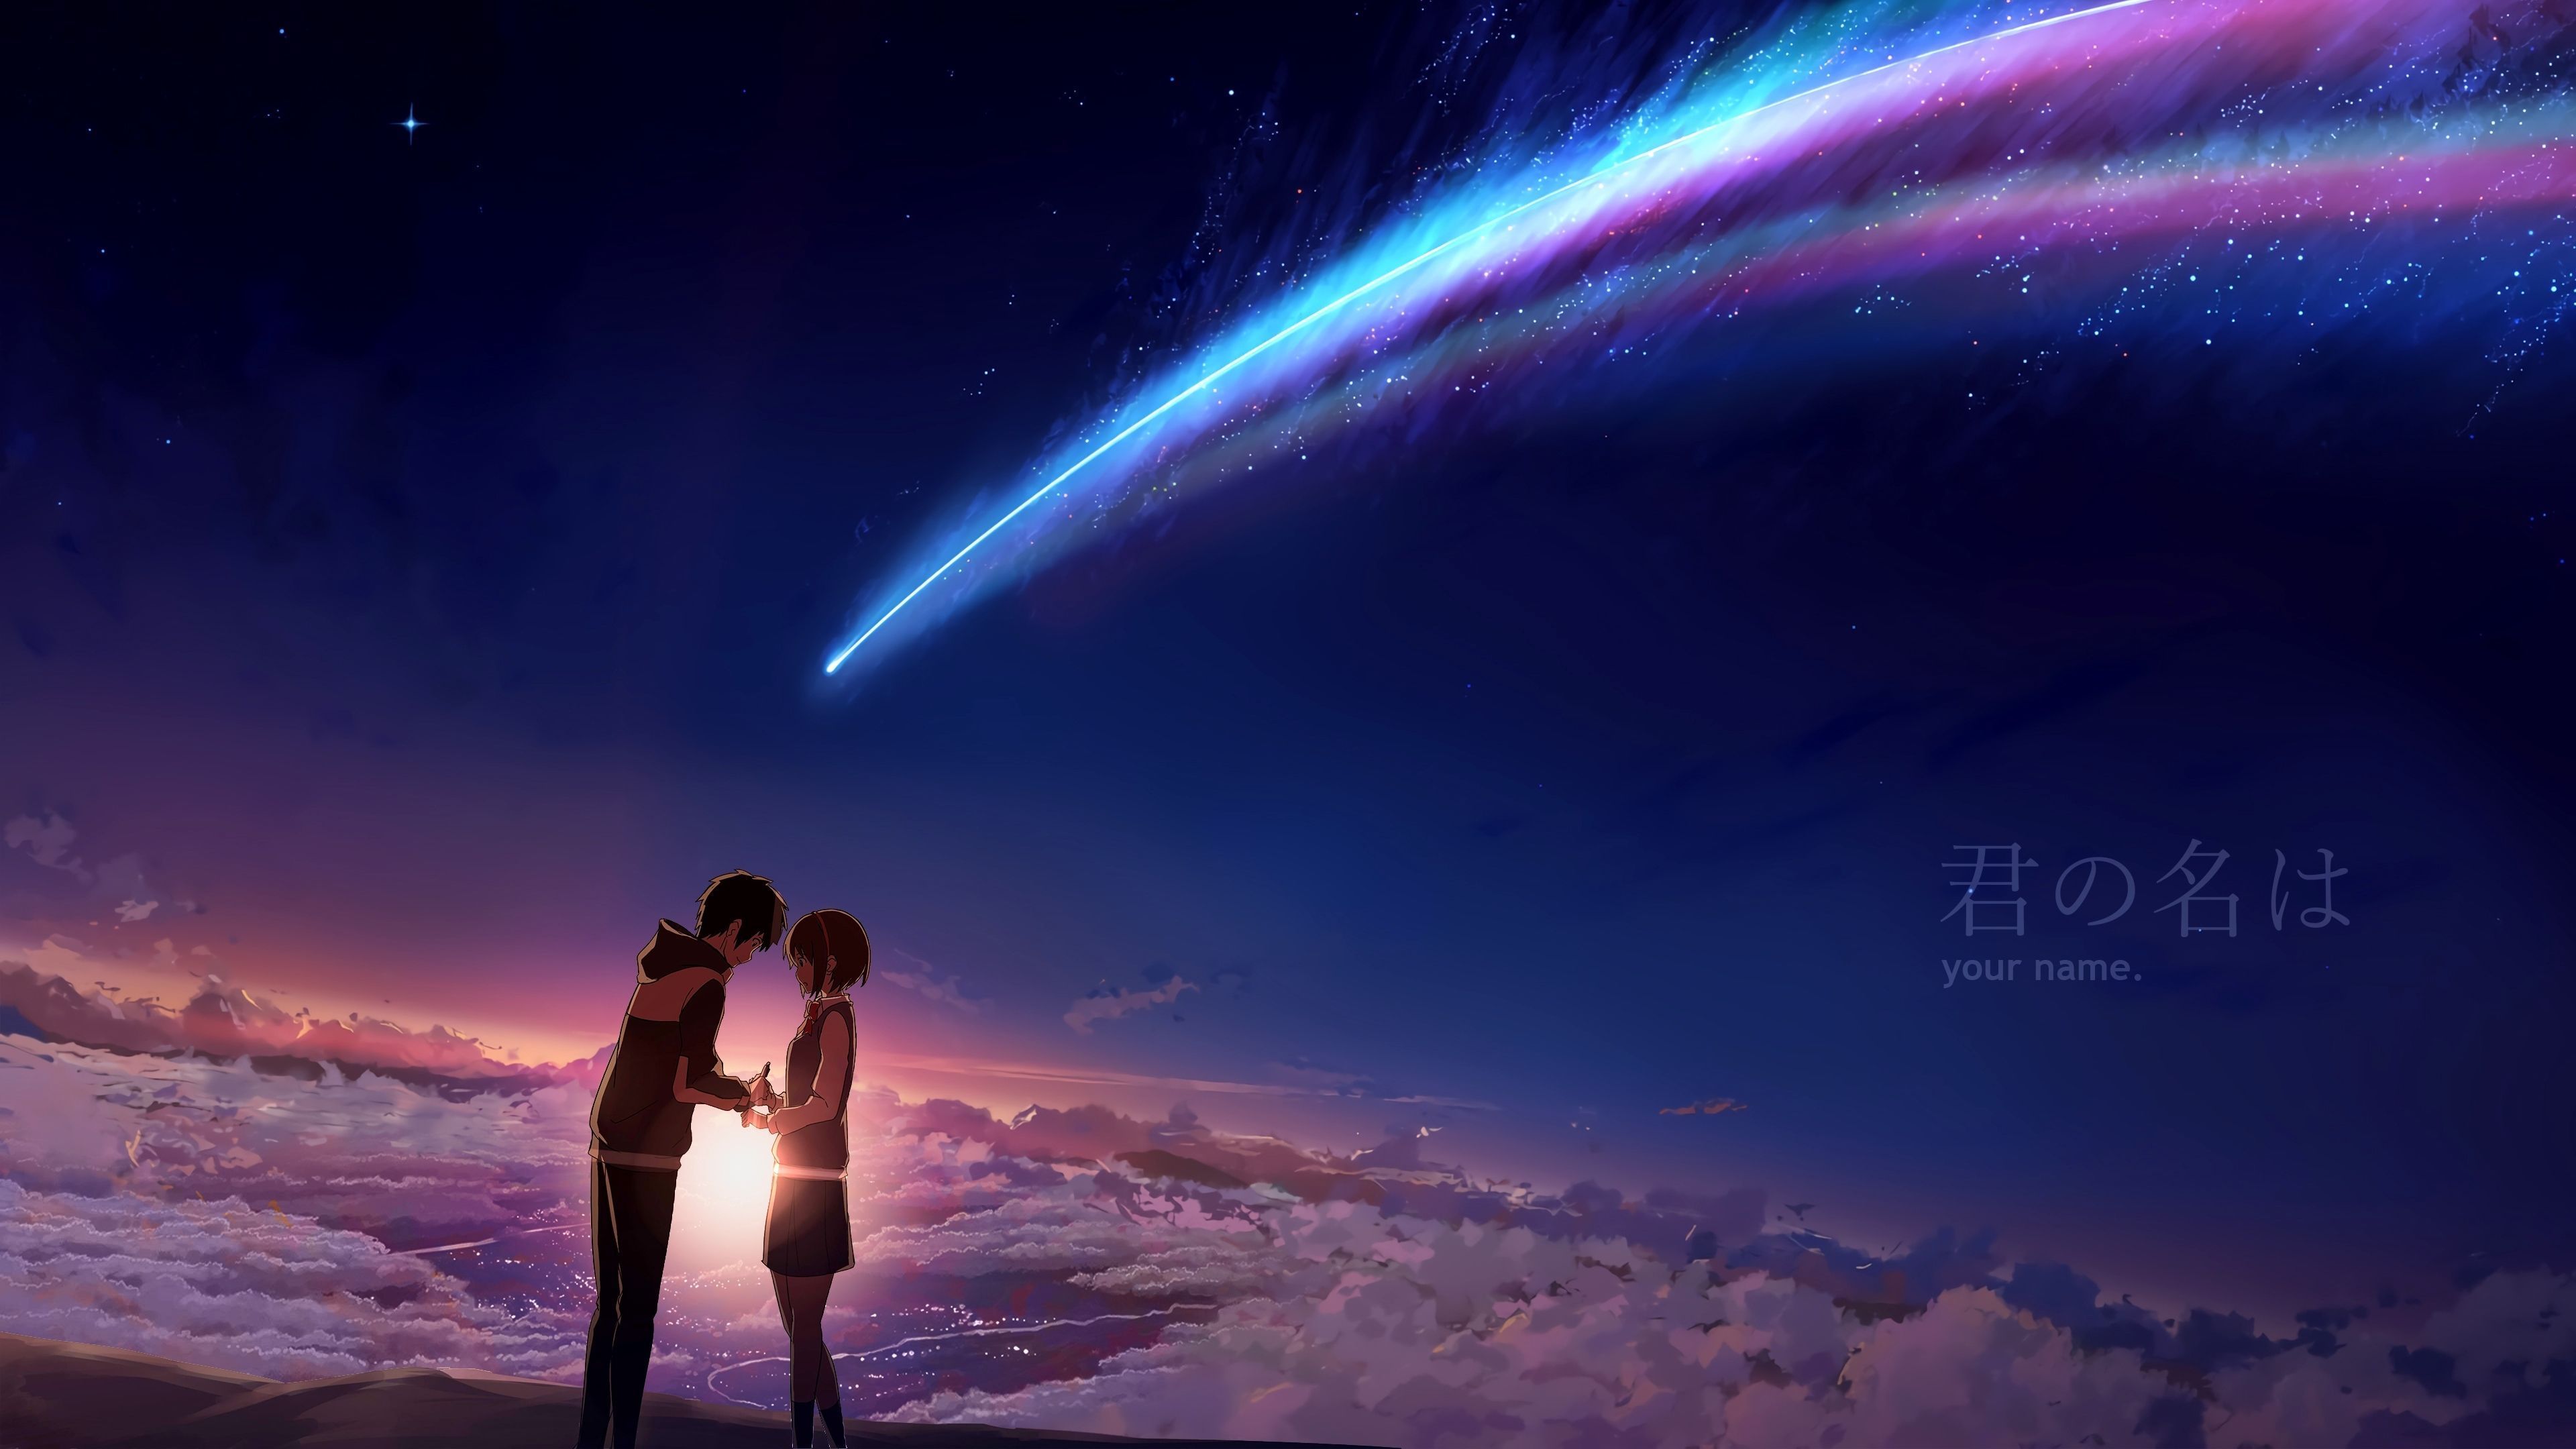 4K Wallpaper For Pc Universe Gallery. Anime wallpaper download, Kimi no na wa wallpaper, 4k wallpaper for pc